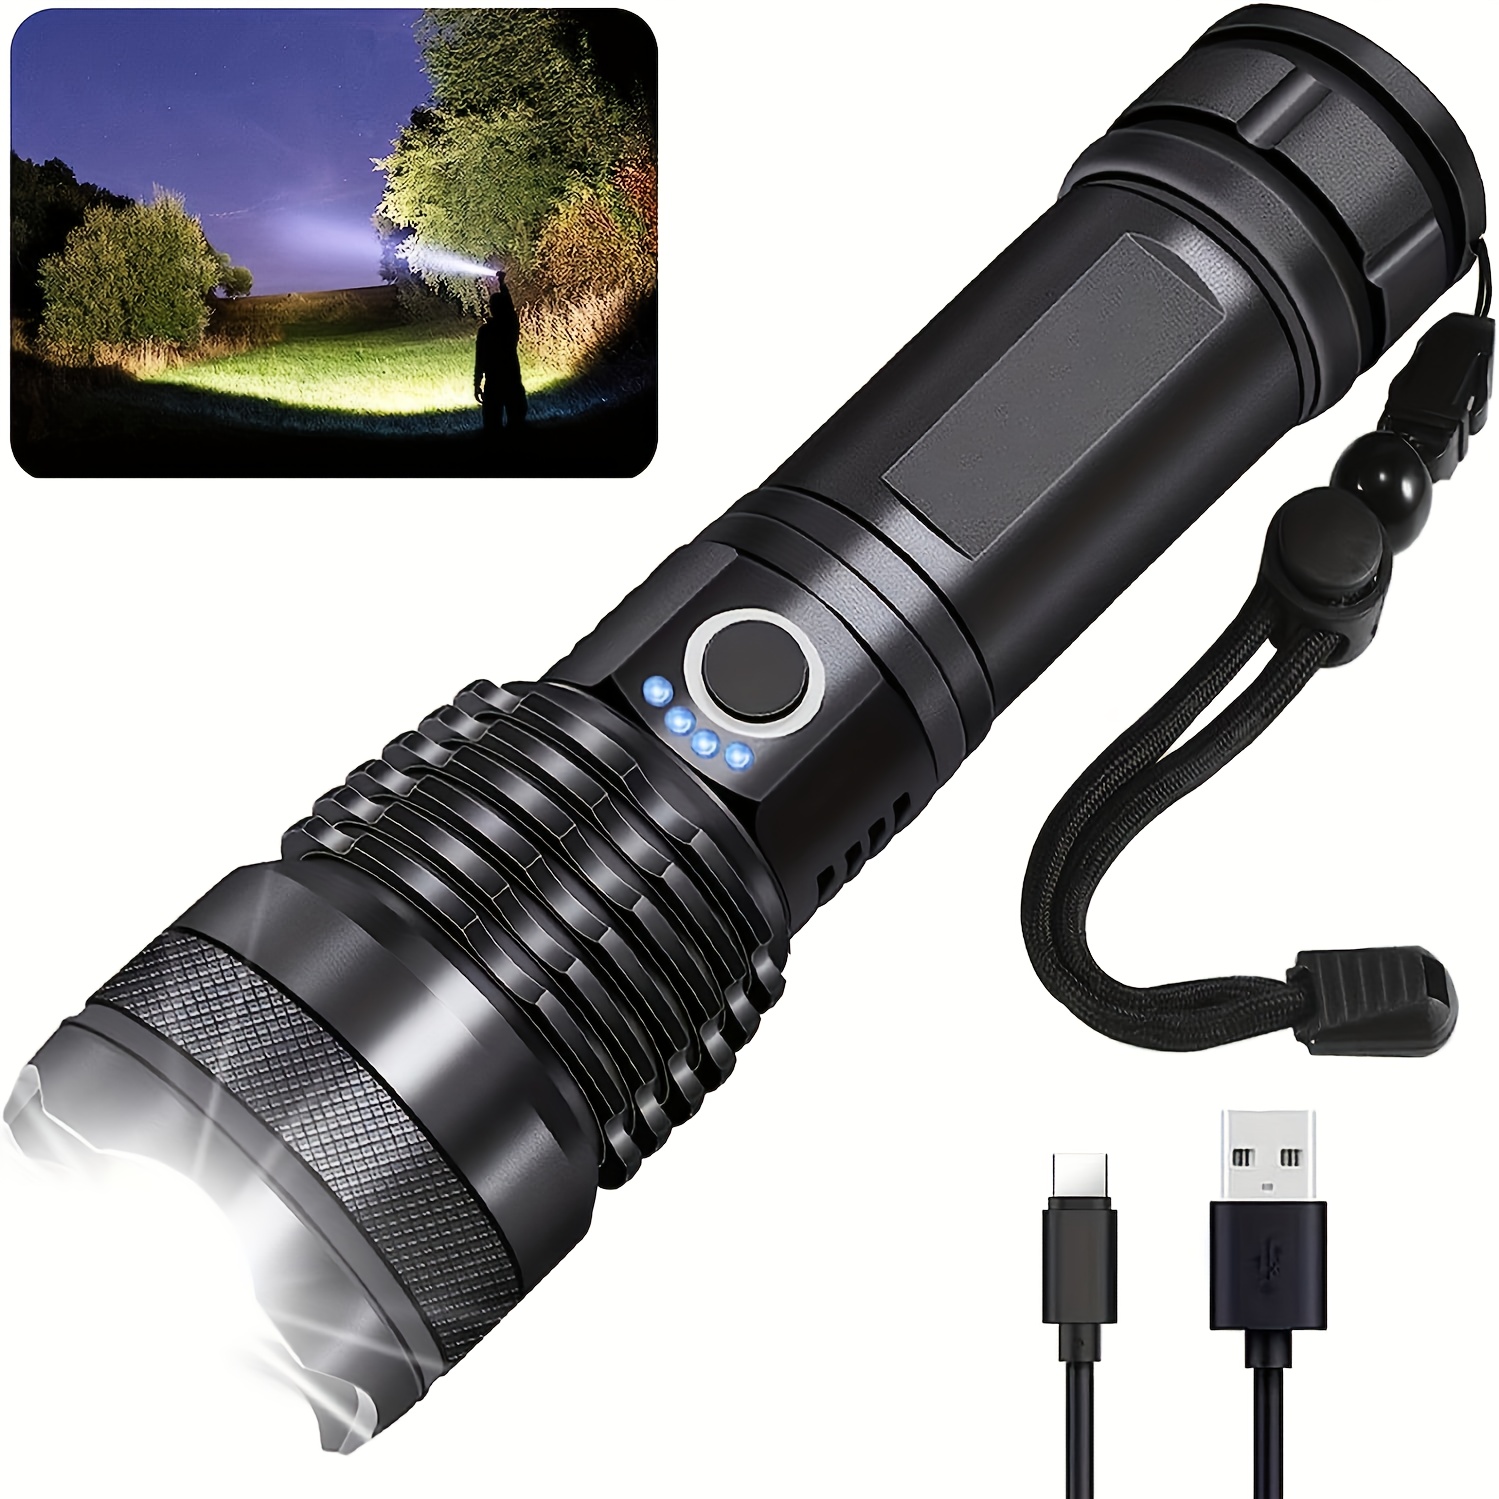 Spotlight flashlight,10000LM,5 Light Modes,Power Bank,Suitable for  Hurricane Emergency,Hiking,Home and More.with Adjustable Stand & Tail  Floodlamp 